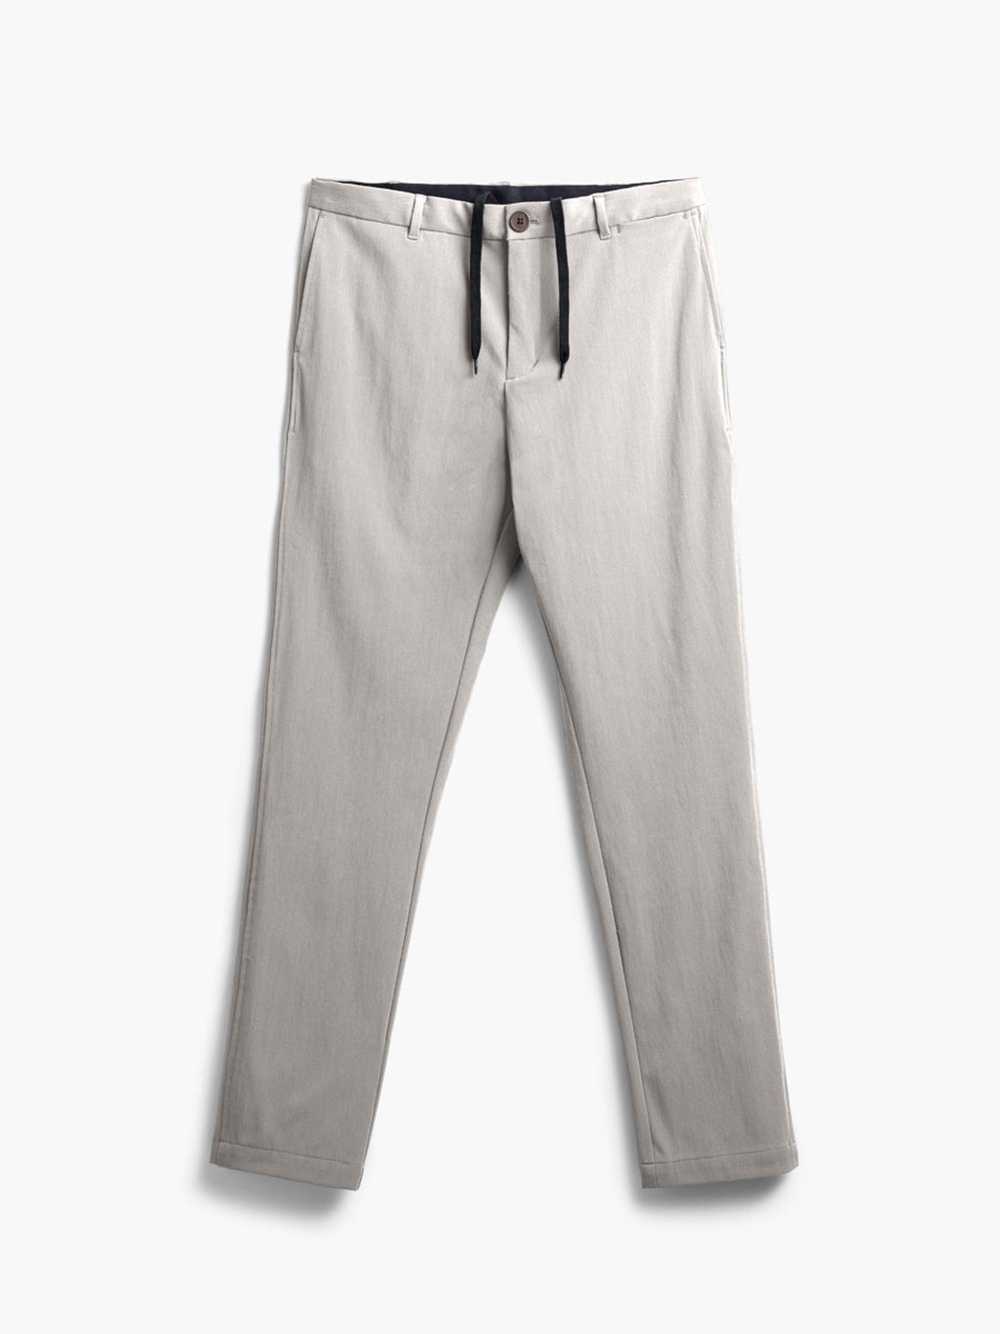 Ministry of Supply Men's Pace Tapered Chino - Lig… - image 1